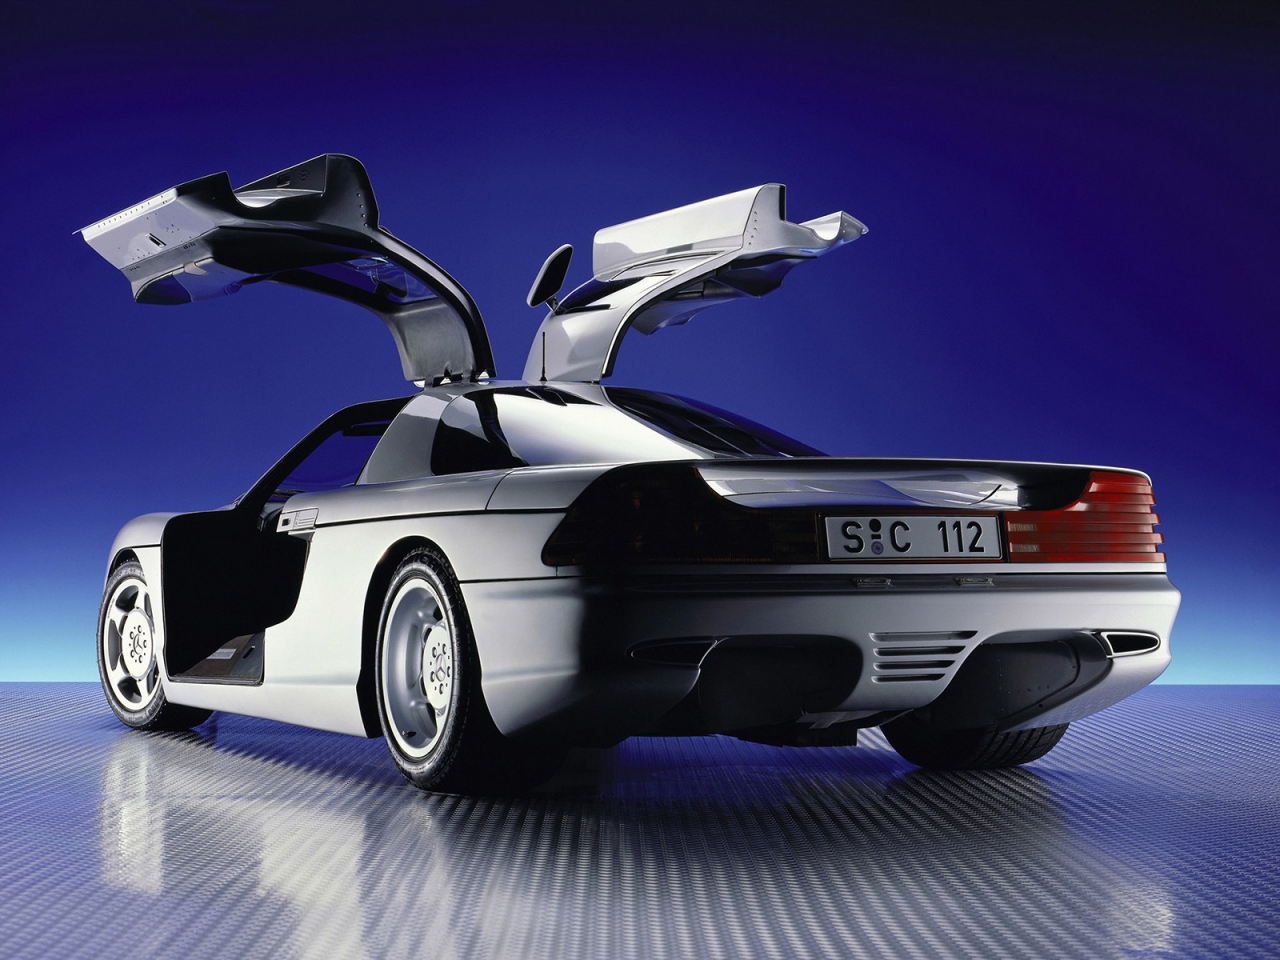 Mercedes C112 Concept 1991 for 1280 x 960 resolution